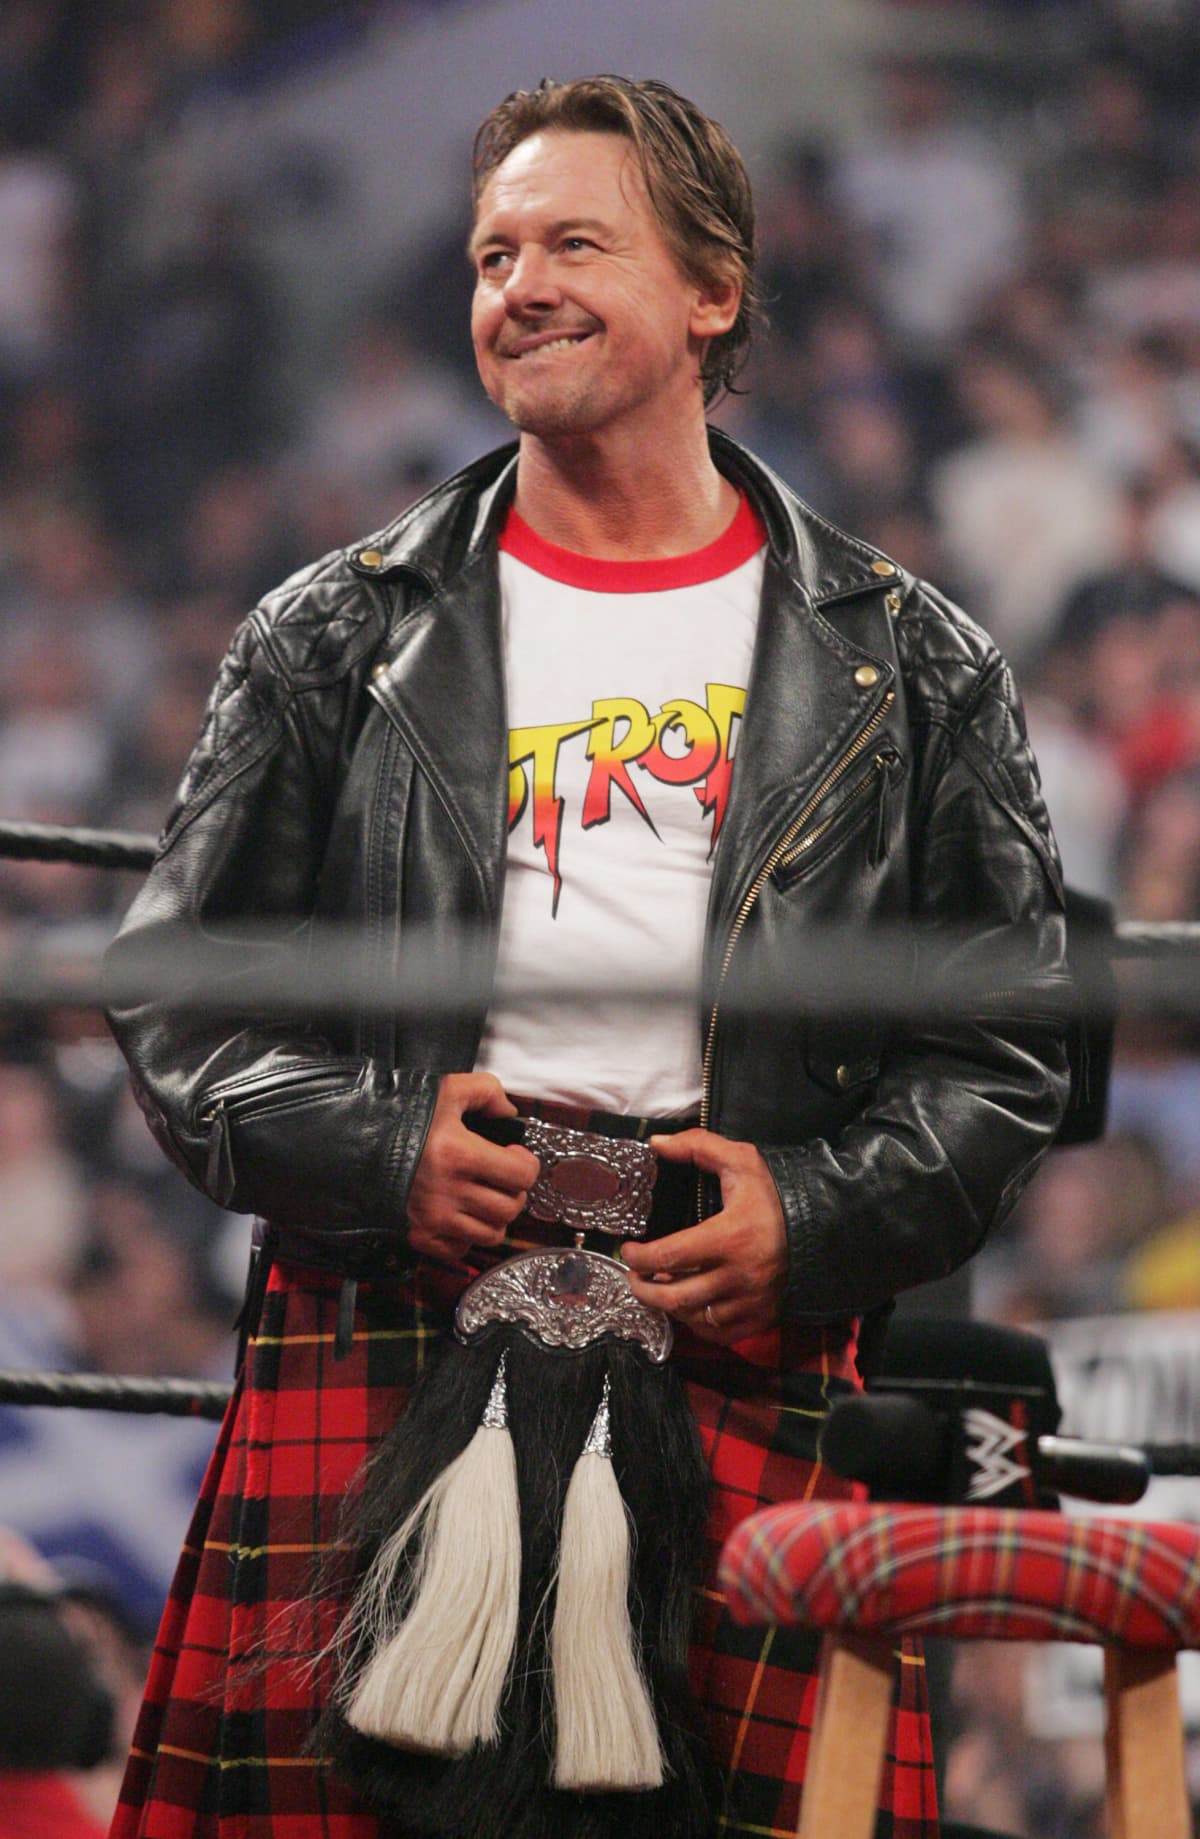 "Rowdy" Roddy Piper (Photo by John Shearer/WireImage for BWR Public Relations)